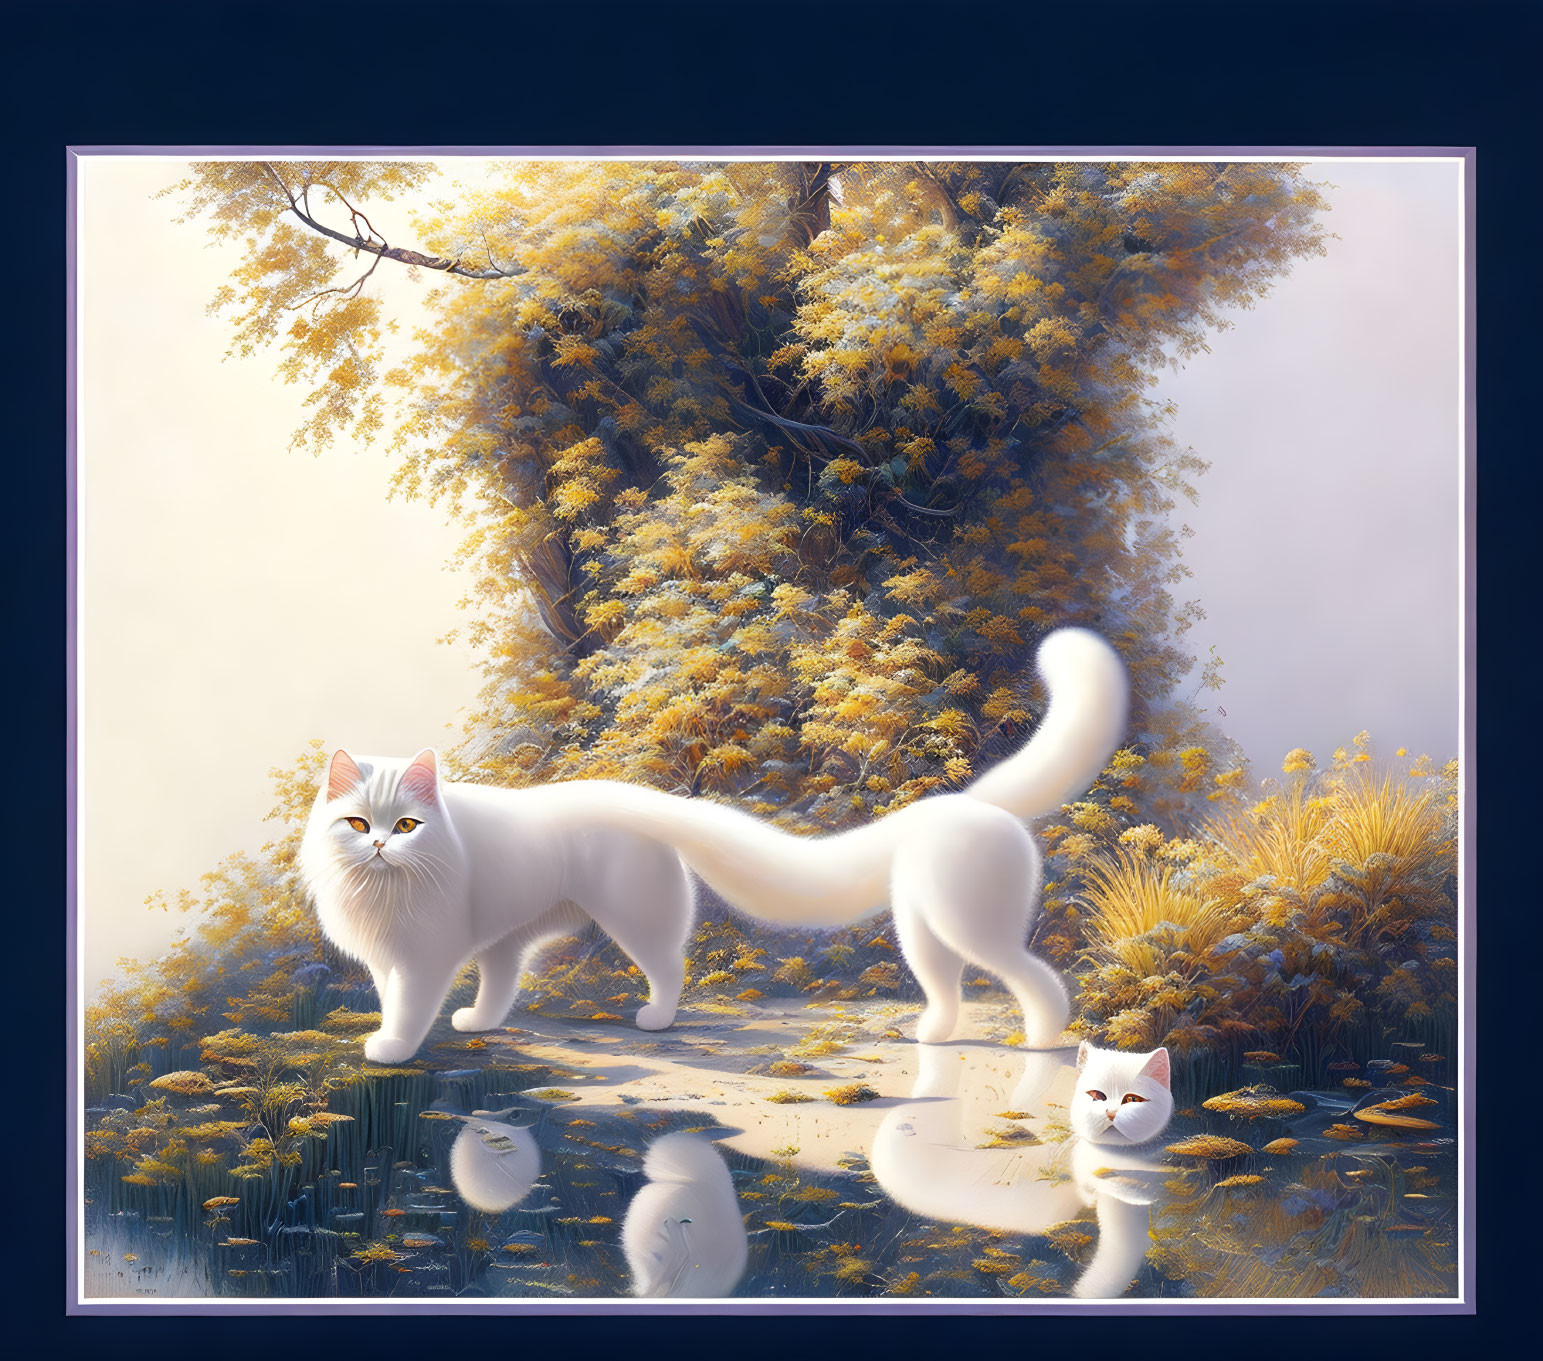 White Long-Bodied Cat with Blue Eyes in Mystical Forest Scene